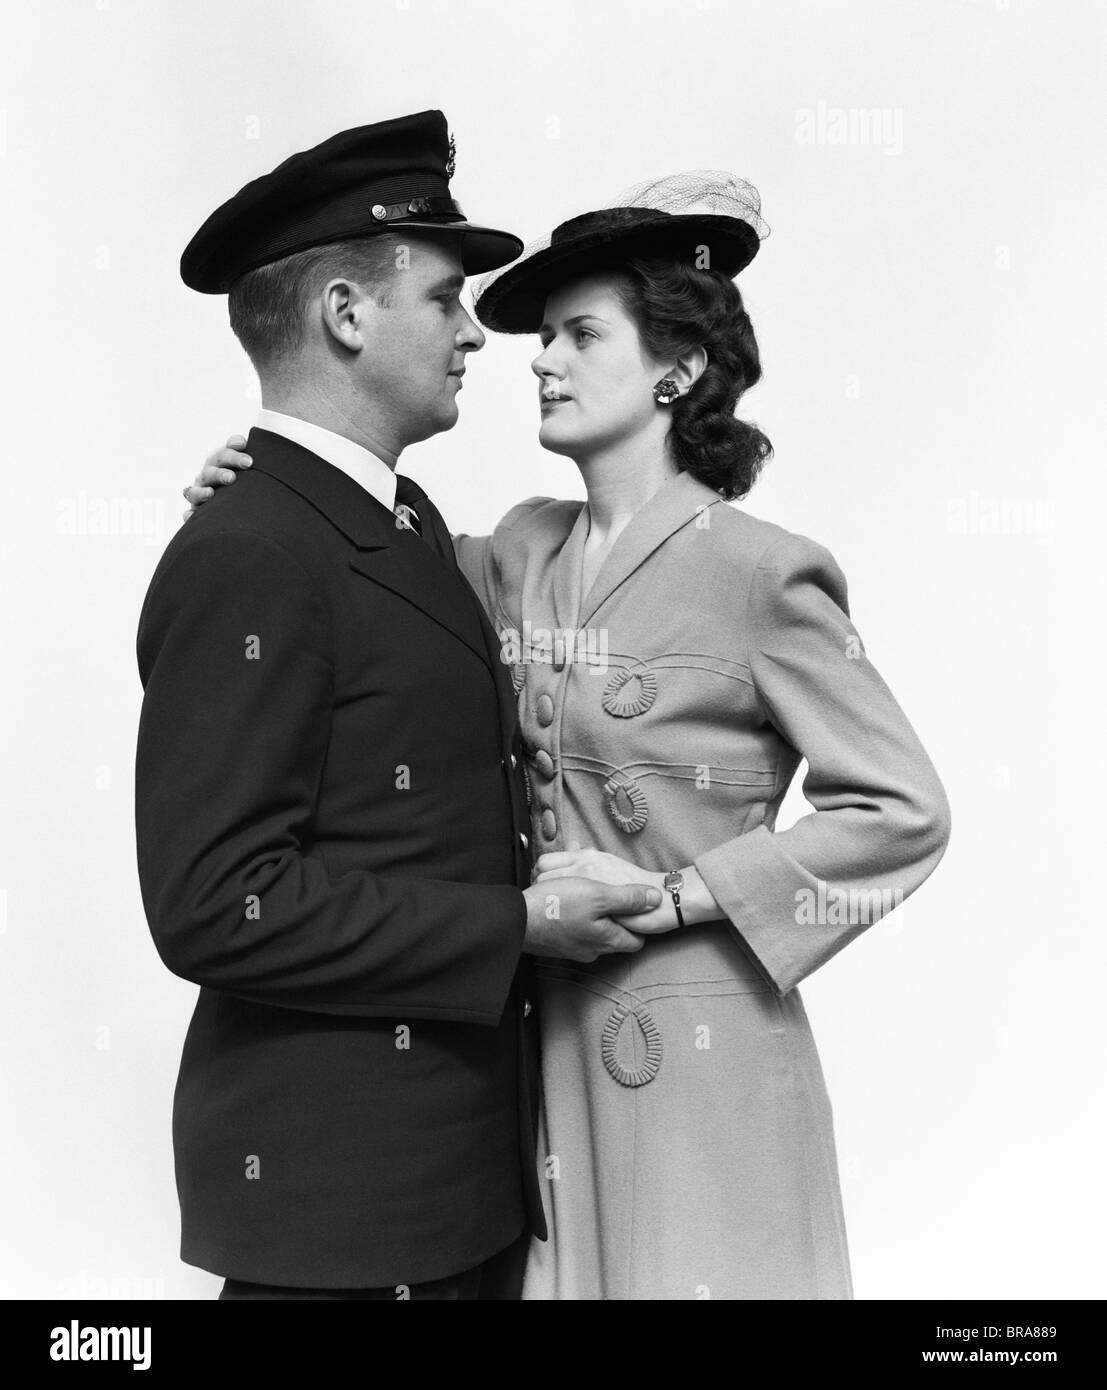 1940s MILITARY COUPLE MAN WOMAN EMBRACING AND HOLDING HANDS Stock Photo